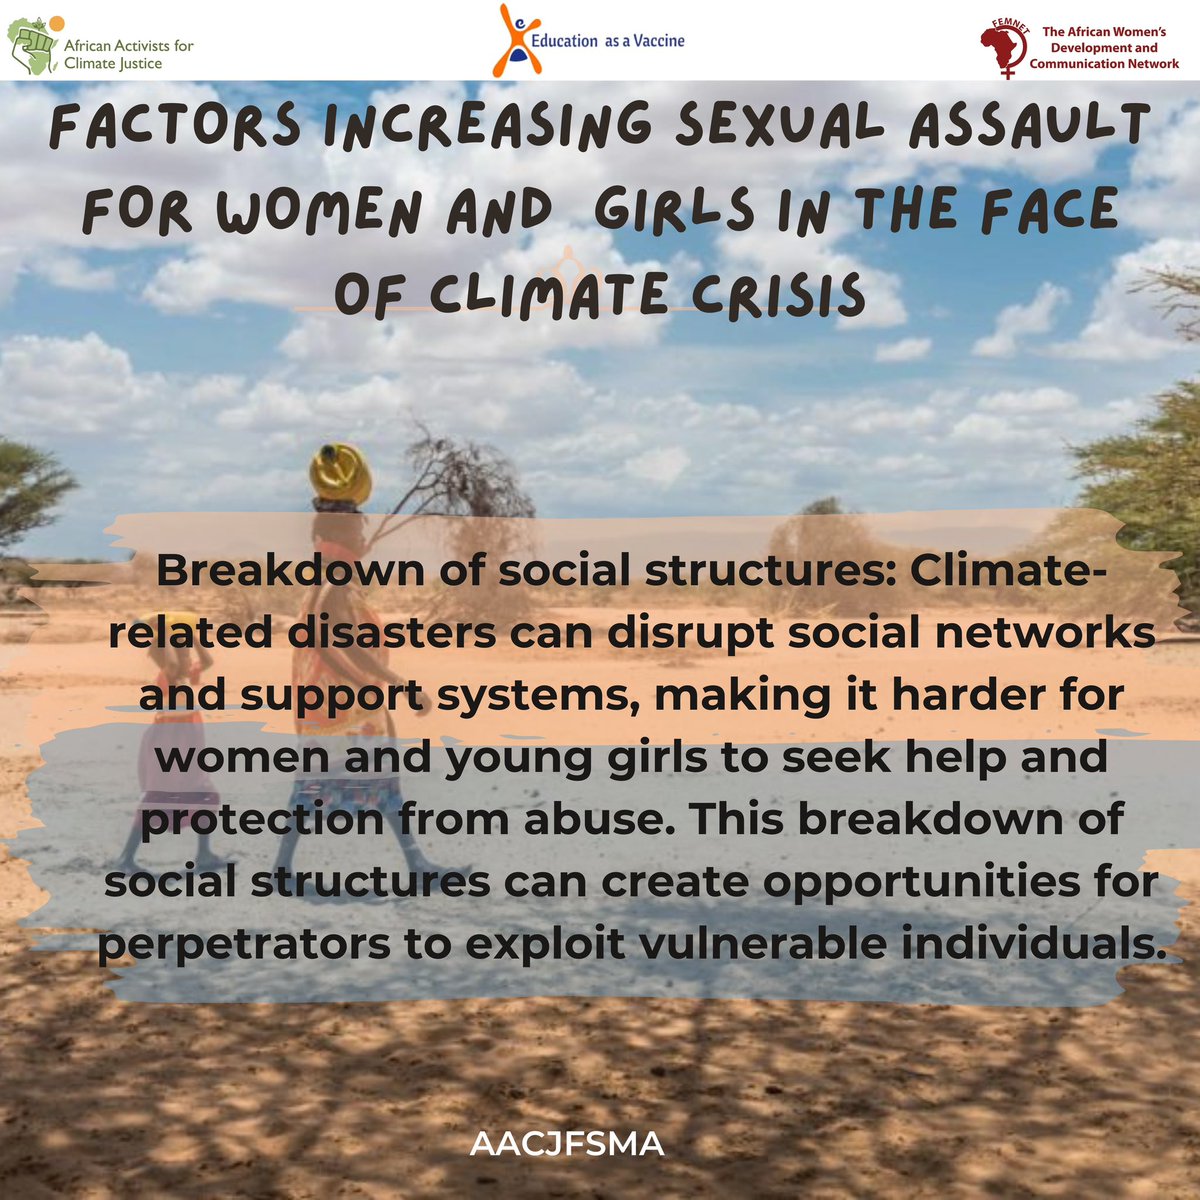 To commensurate with the theme of this year’s Sexual Assault Awareness Month “Building Connected Communities” we highlight some of the factors contributing to the high prevalence of Sexual assault in communities that are affected by climate change.
#SAAM
#AACJFSMA
@EVA_Nigeria